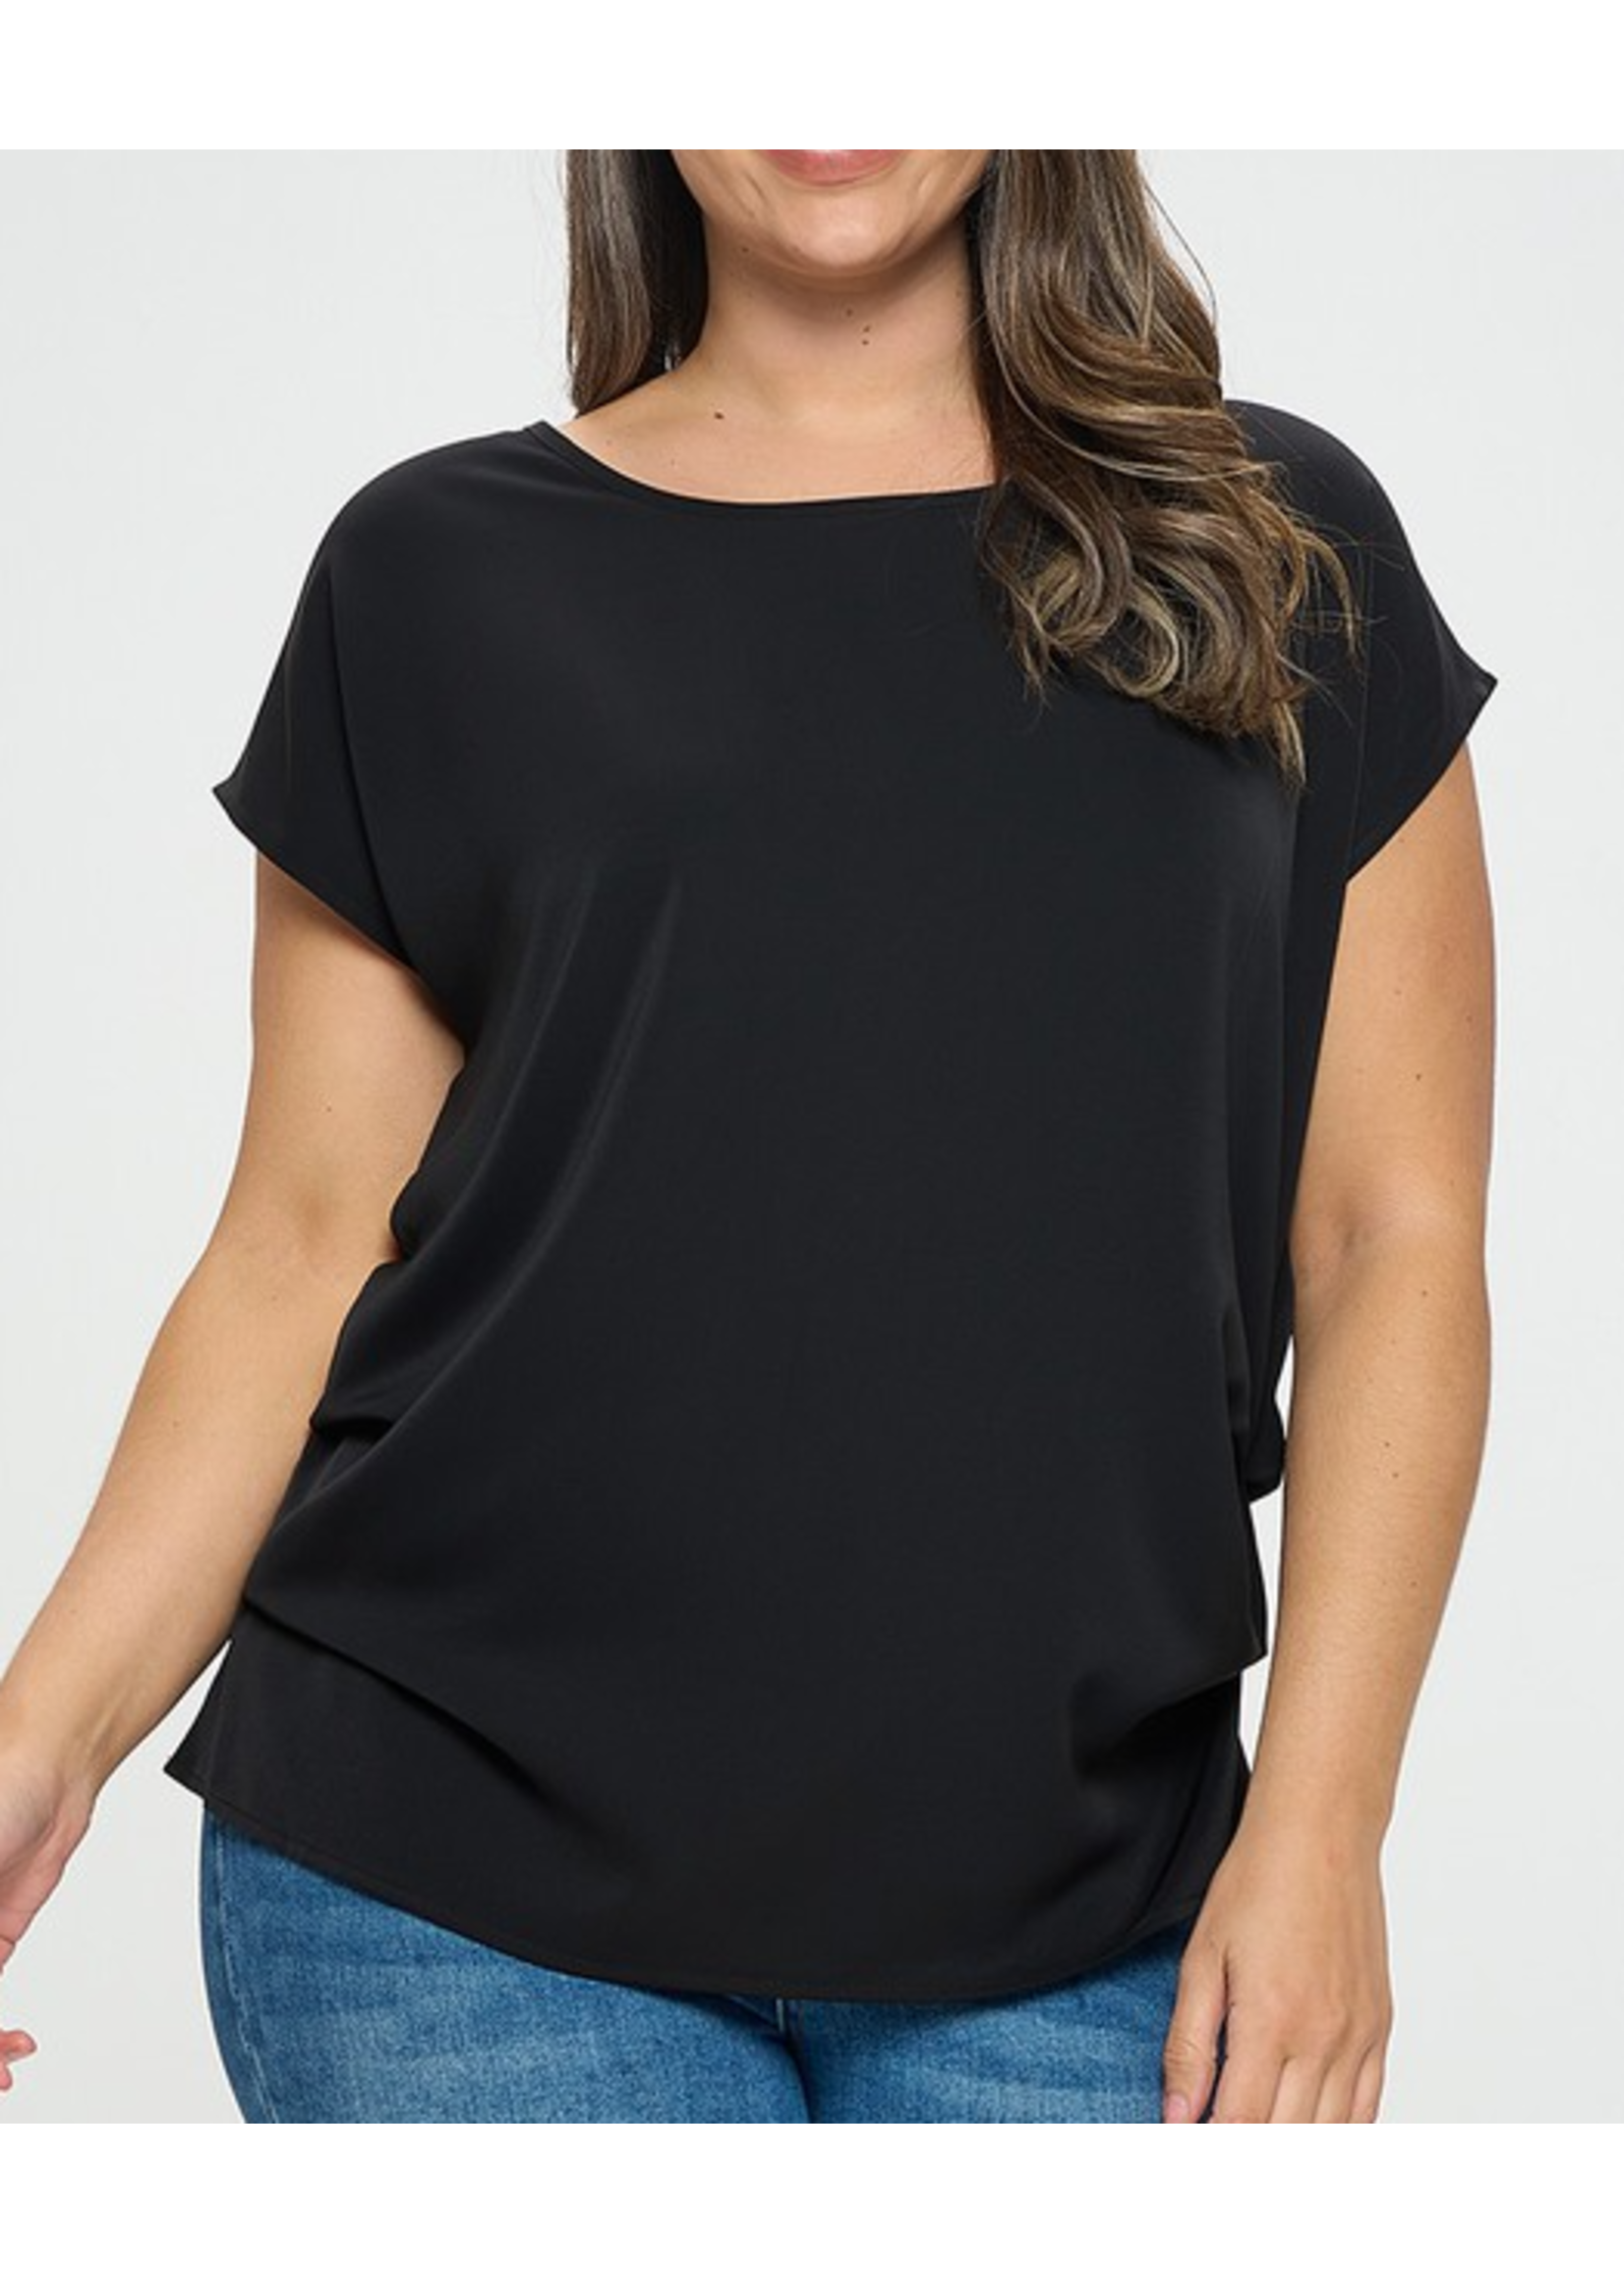 TPIT5531 - PLUS RELACED FIT TOP W SIDE RUCHED DETAIL